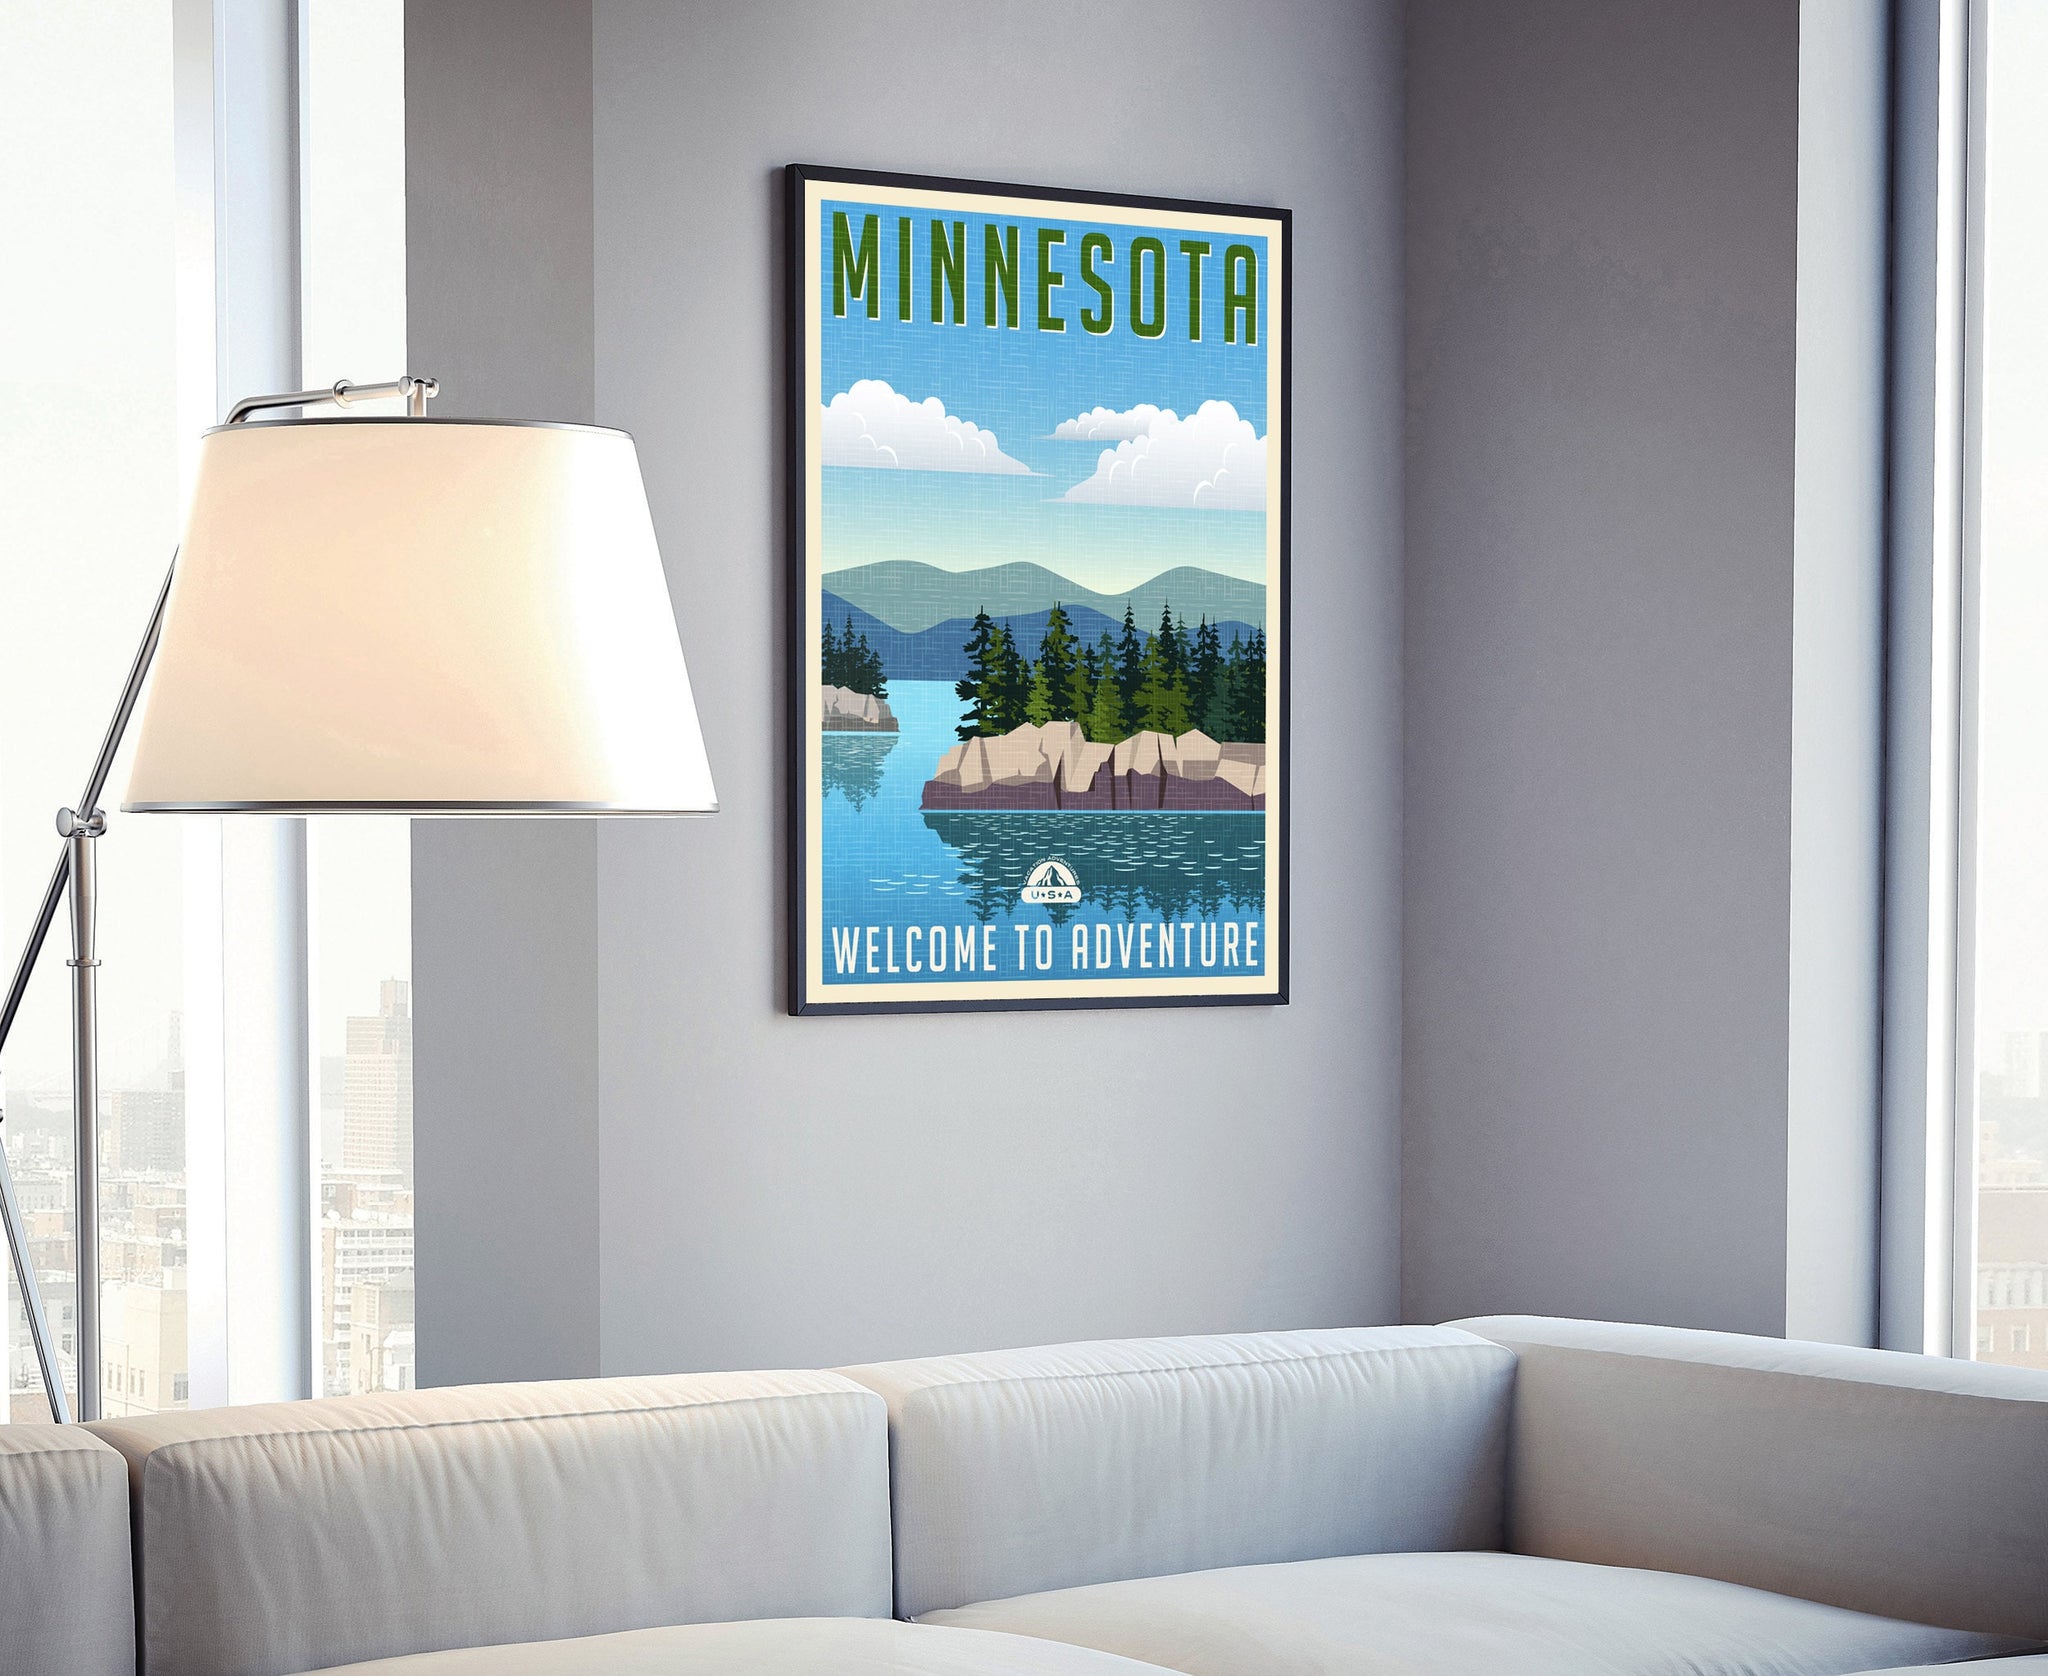 Retro Style Travel Poster, Minnesota, Vintage Rustic Poster Print, Home Wall Art, Office Wall Decor,  Minnesota poster, Penn state wall art